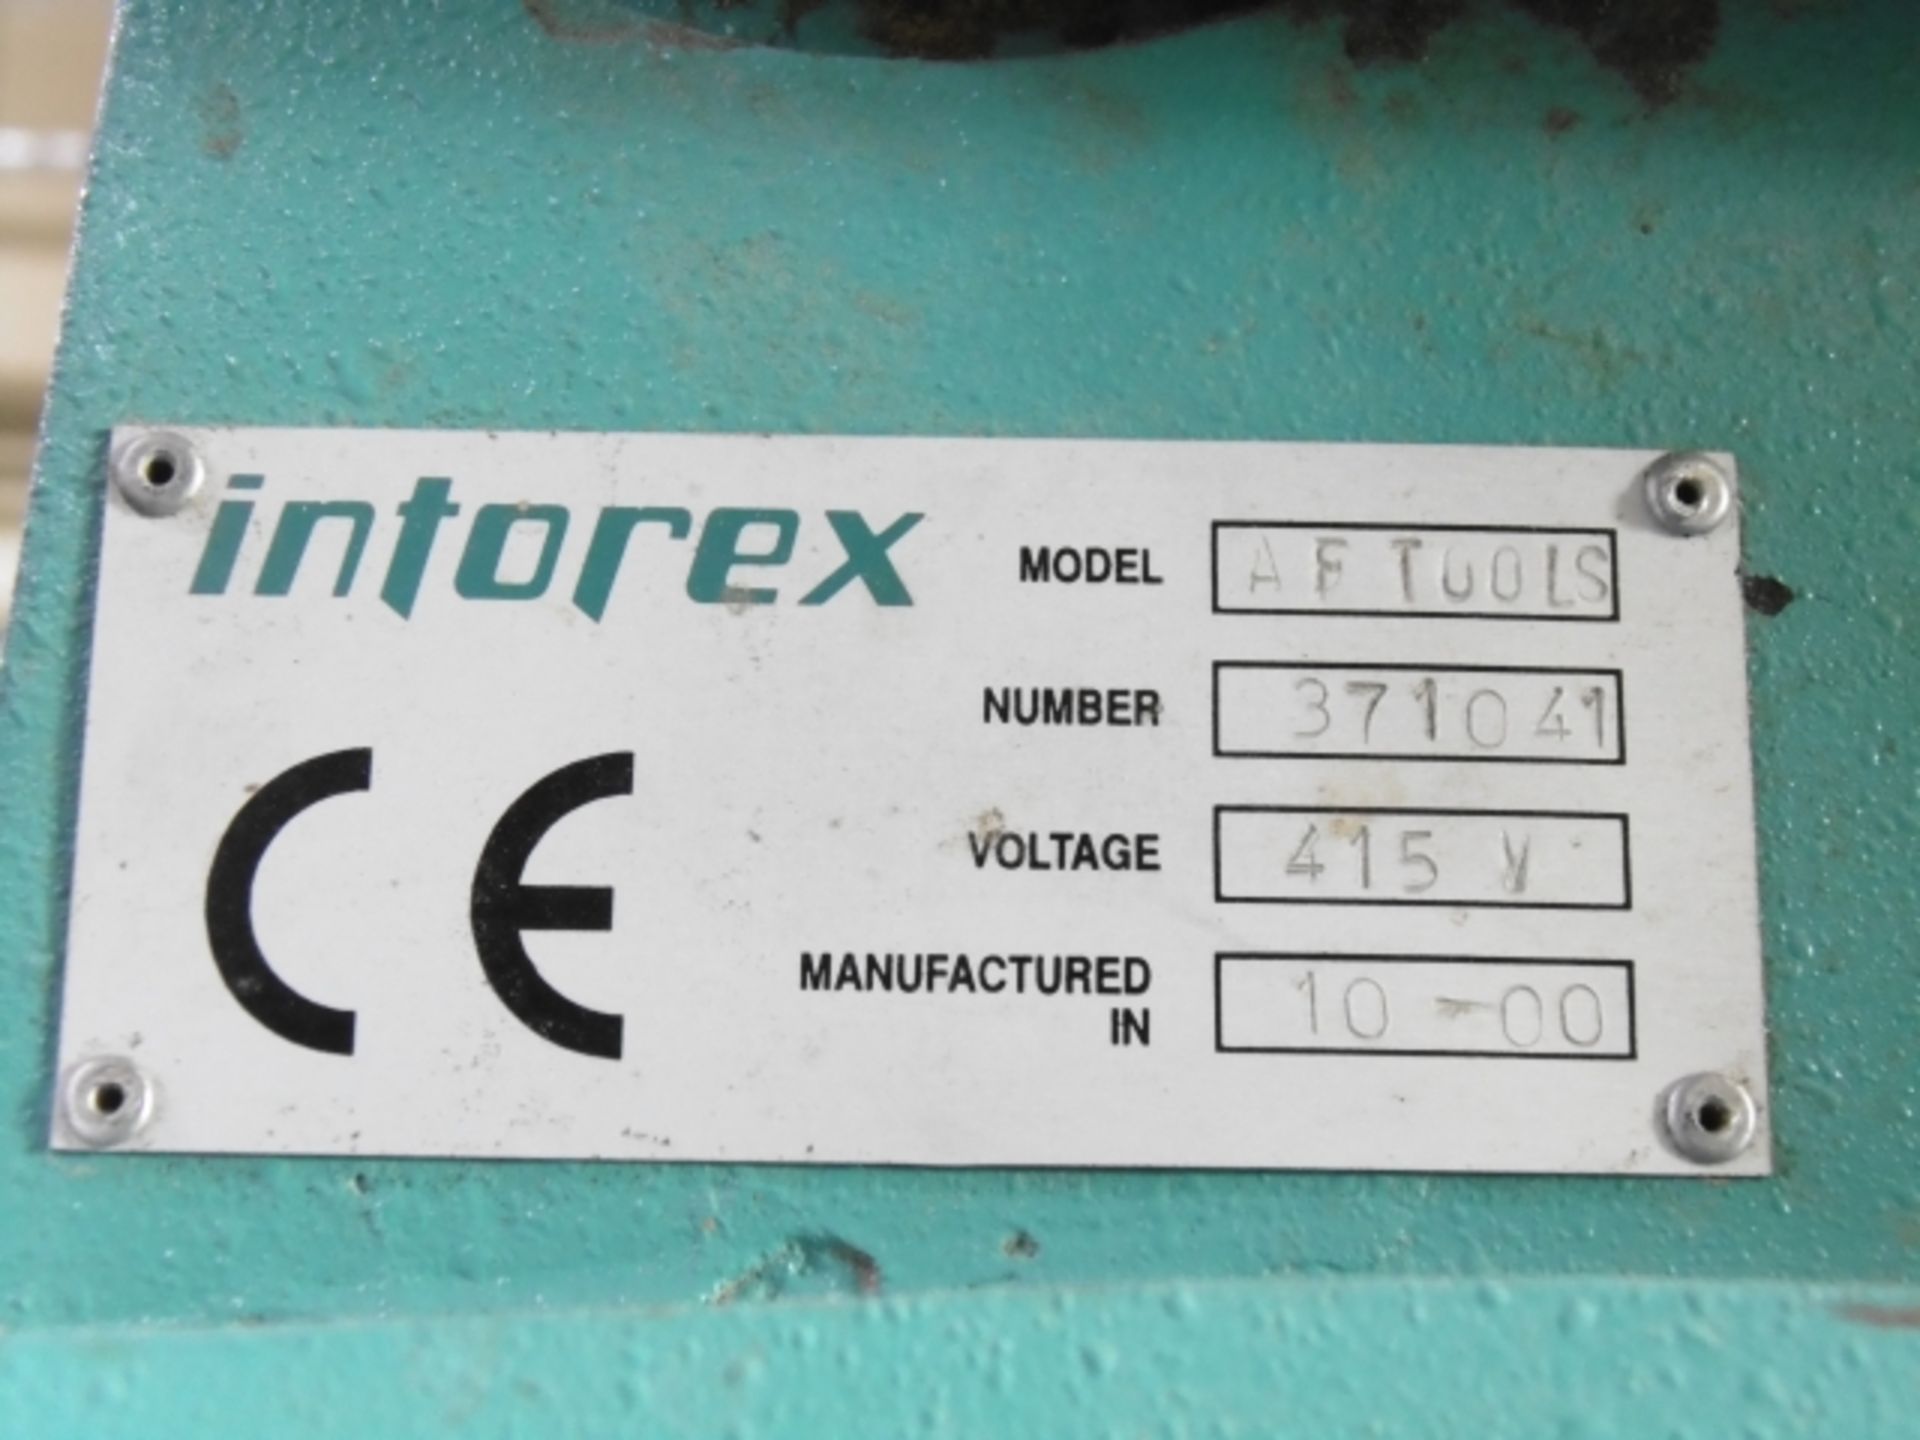 * 2000 Intorex AF Tools Double Ended Tool Grinder. Serial No 371041 - Image 3 of 3